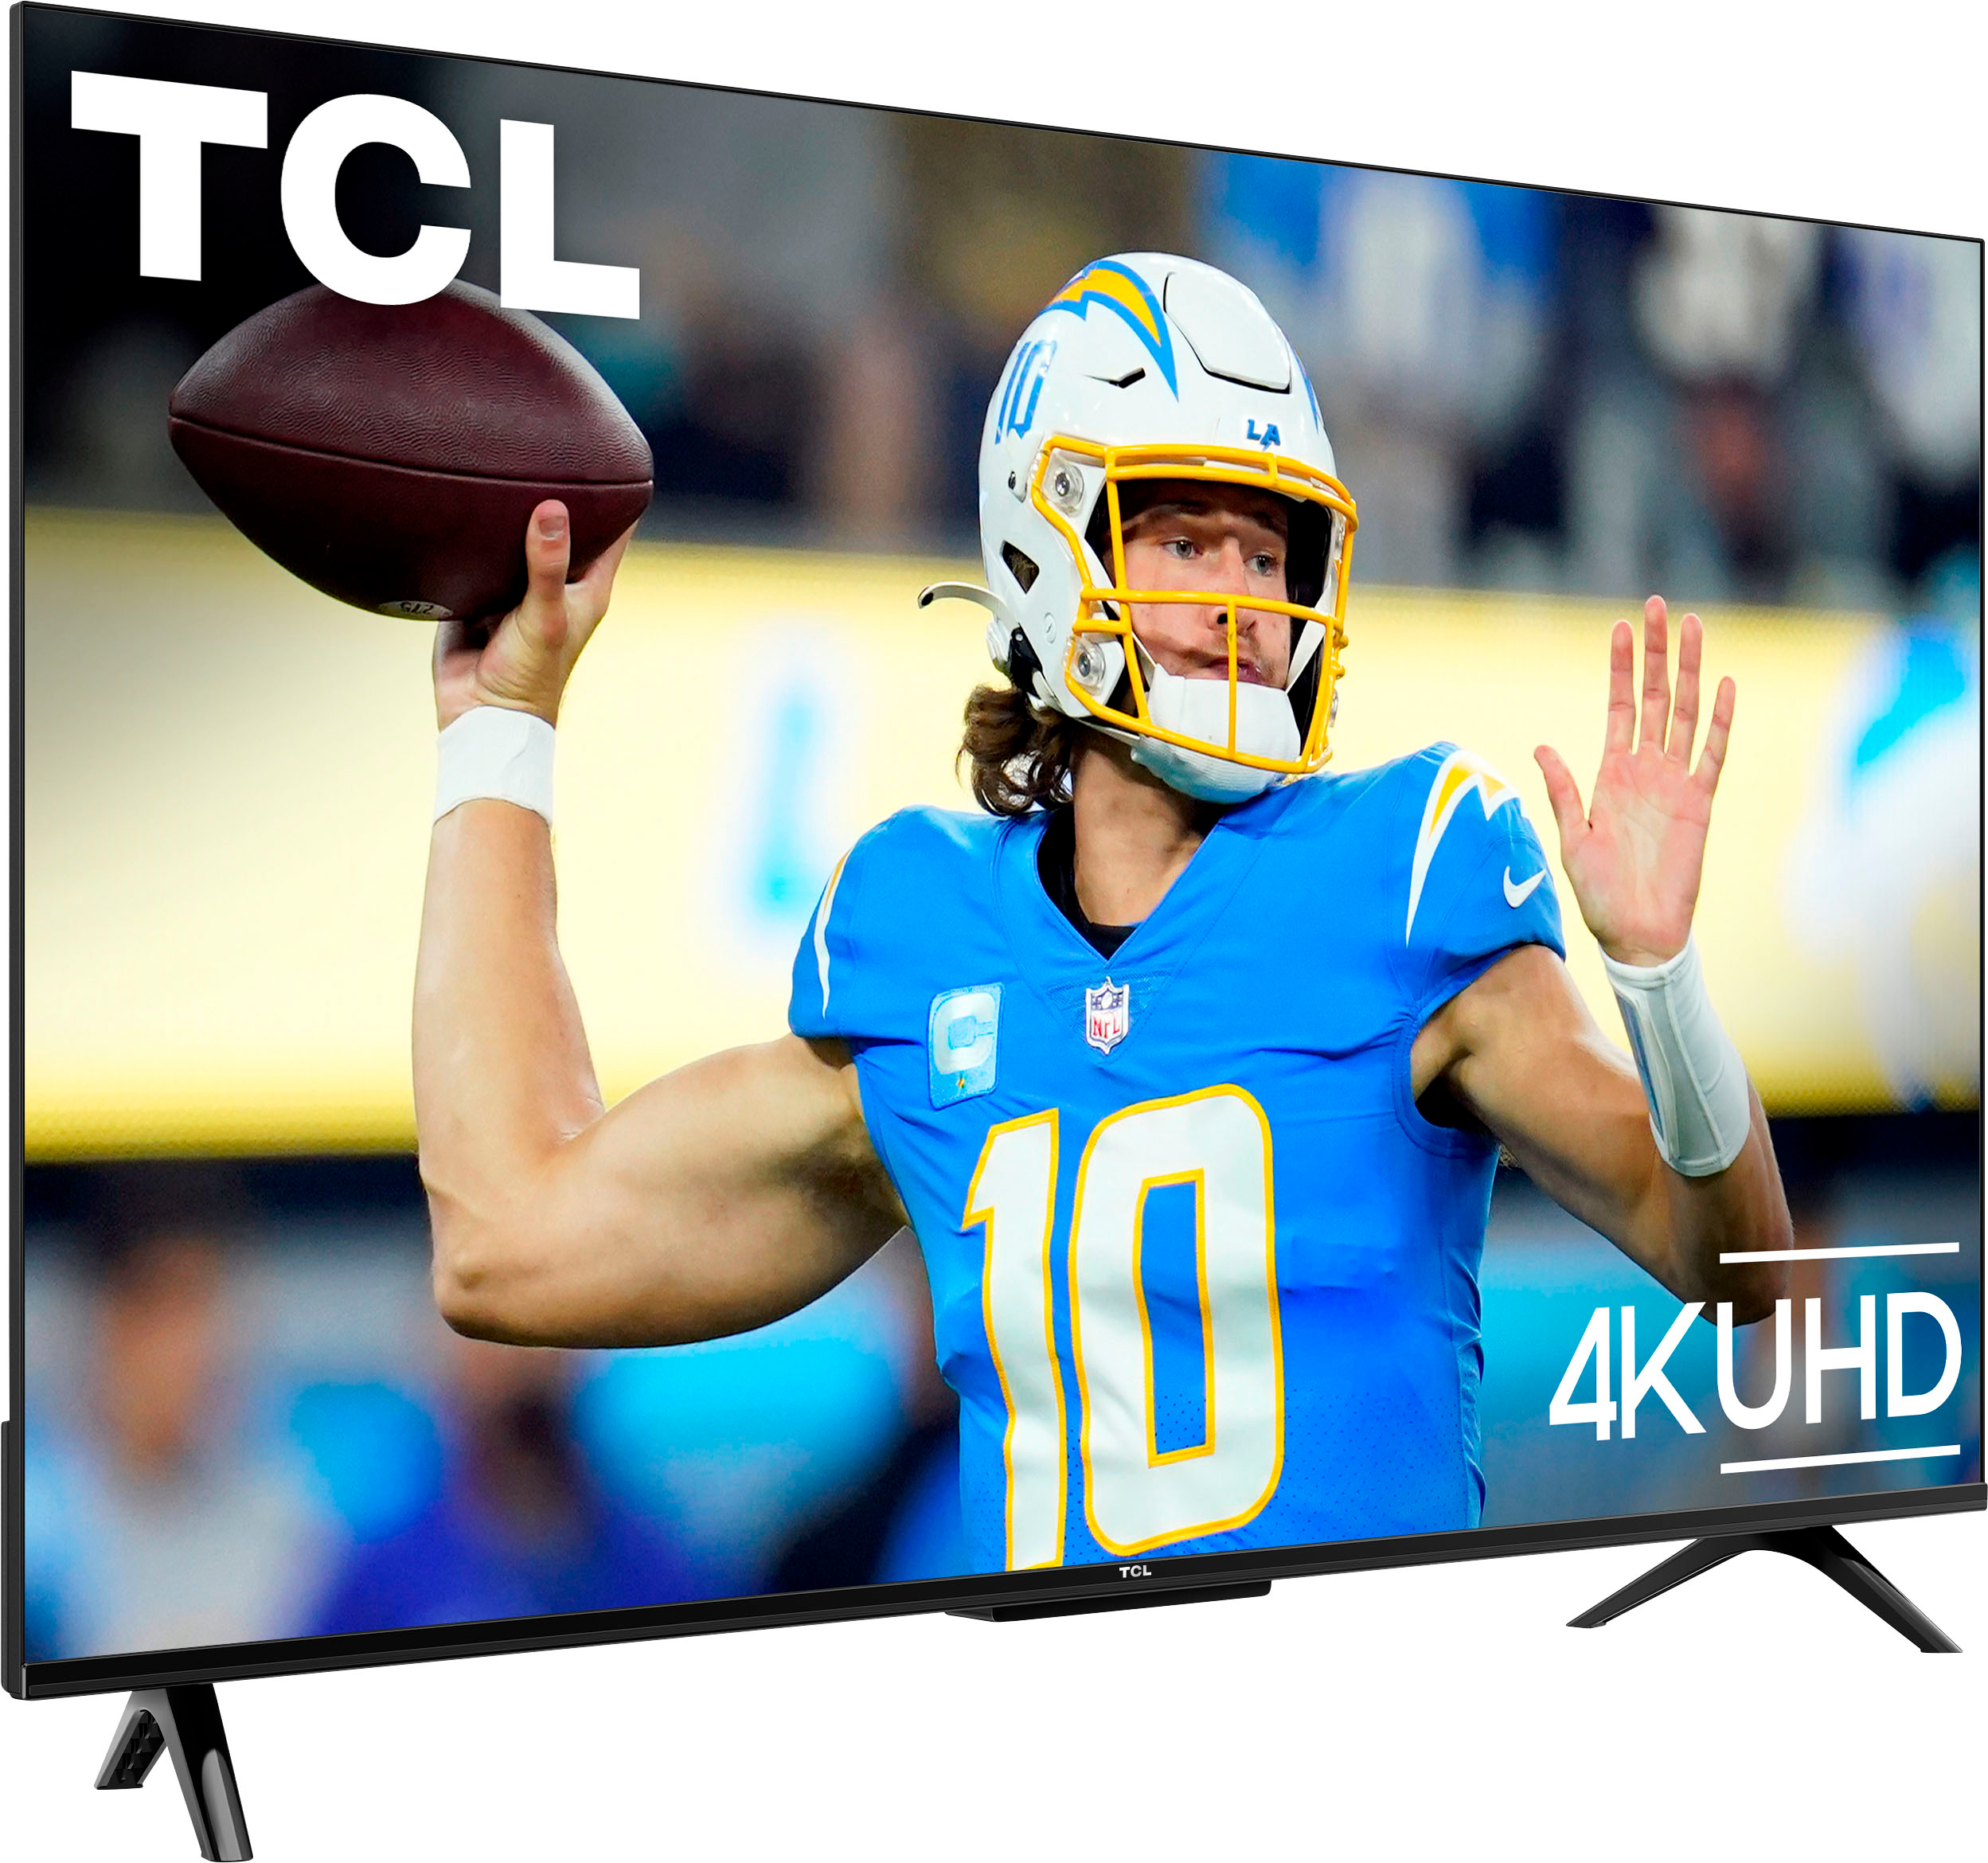 TCL 43 S Class 4K UHD HDR LED Smart TV with Google TV - 43S450G